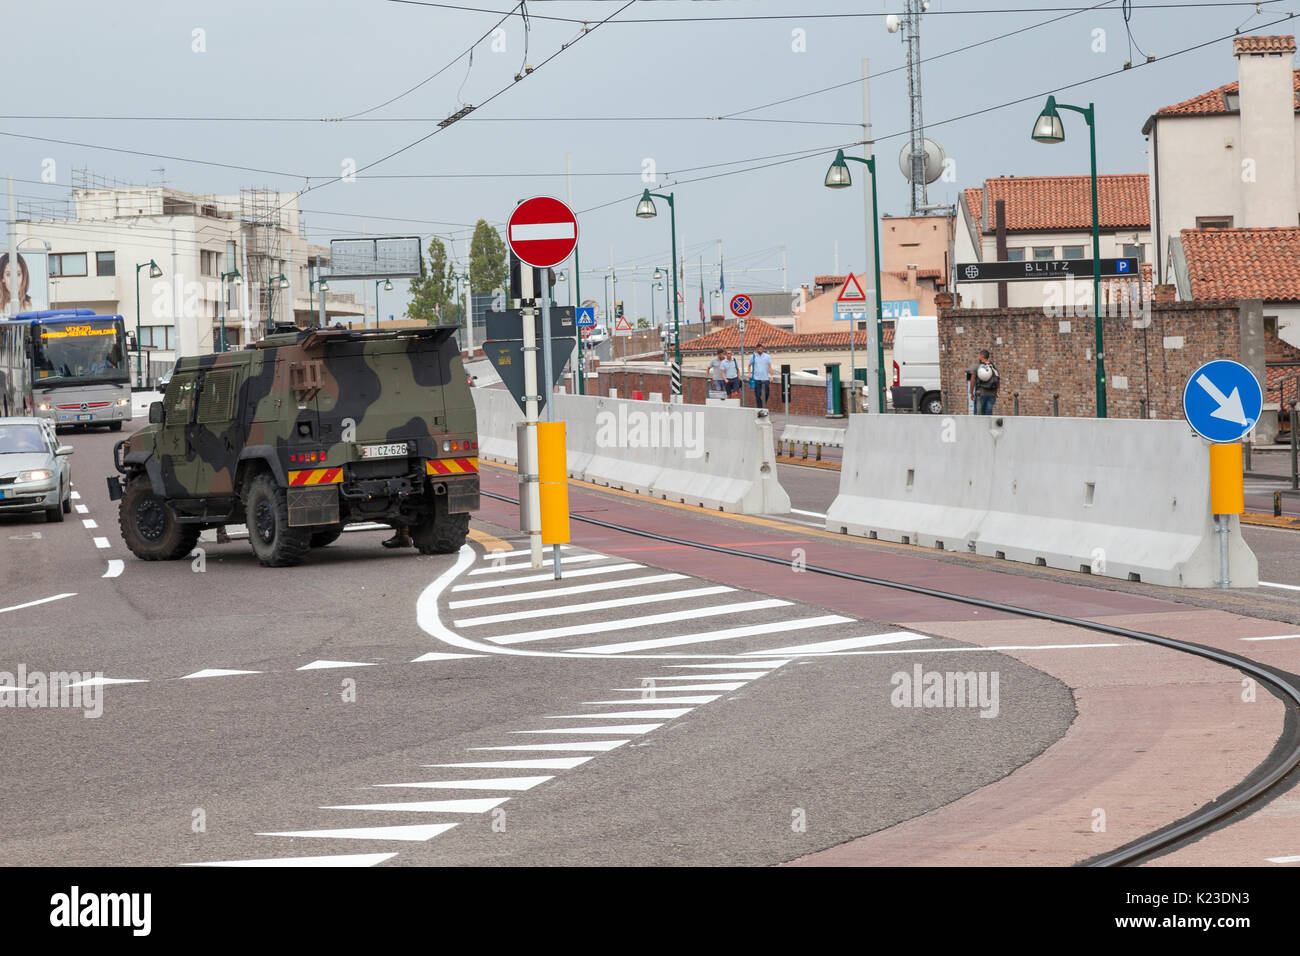 Venice, Veneto, Italy. 28th Aug, 2017. Anti-terror concrete barriers and police presence in Piazzale Roma ahead of the start of the Venice Film Festival. This is the first day after completion of the installation of the barriers to check the viabilty of traffic flow and pedestrians. An armoured car was in place on Ponte della Liberta blocking one lane. The barriers are designed to block any vehicular attack. Credit: Mary Clarke/Alamy Live News Stock Photo